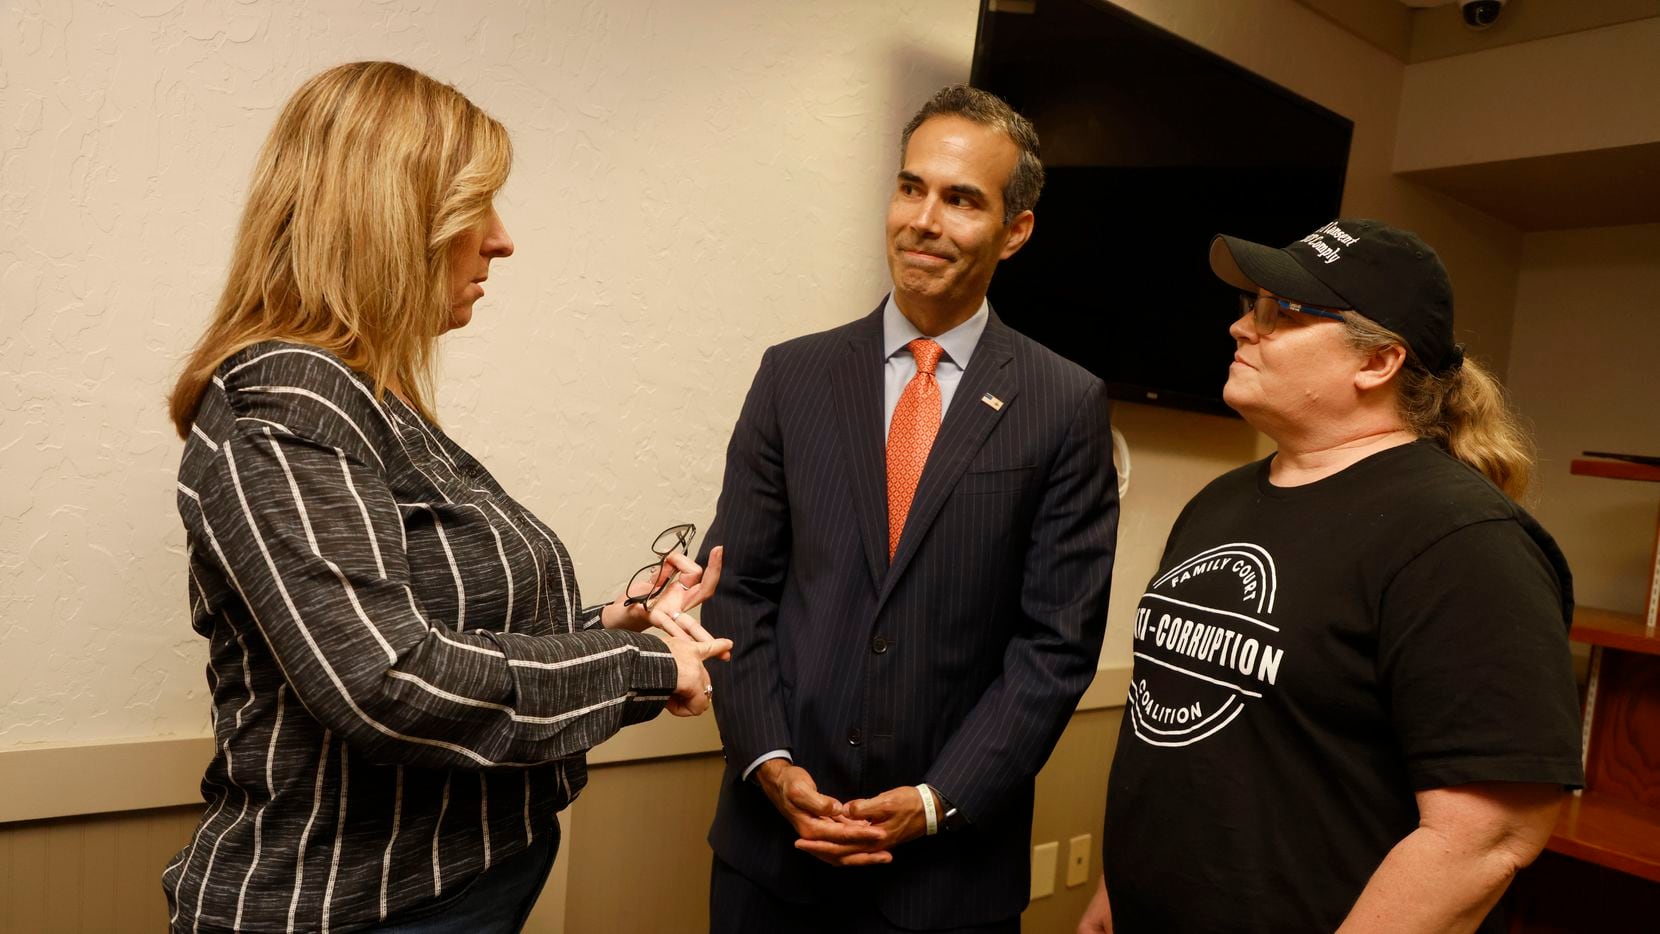 Melanie Fletcher, left, and Jodi Mueller, right talk to George P. Bush, who is in a runoff...